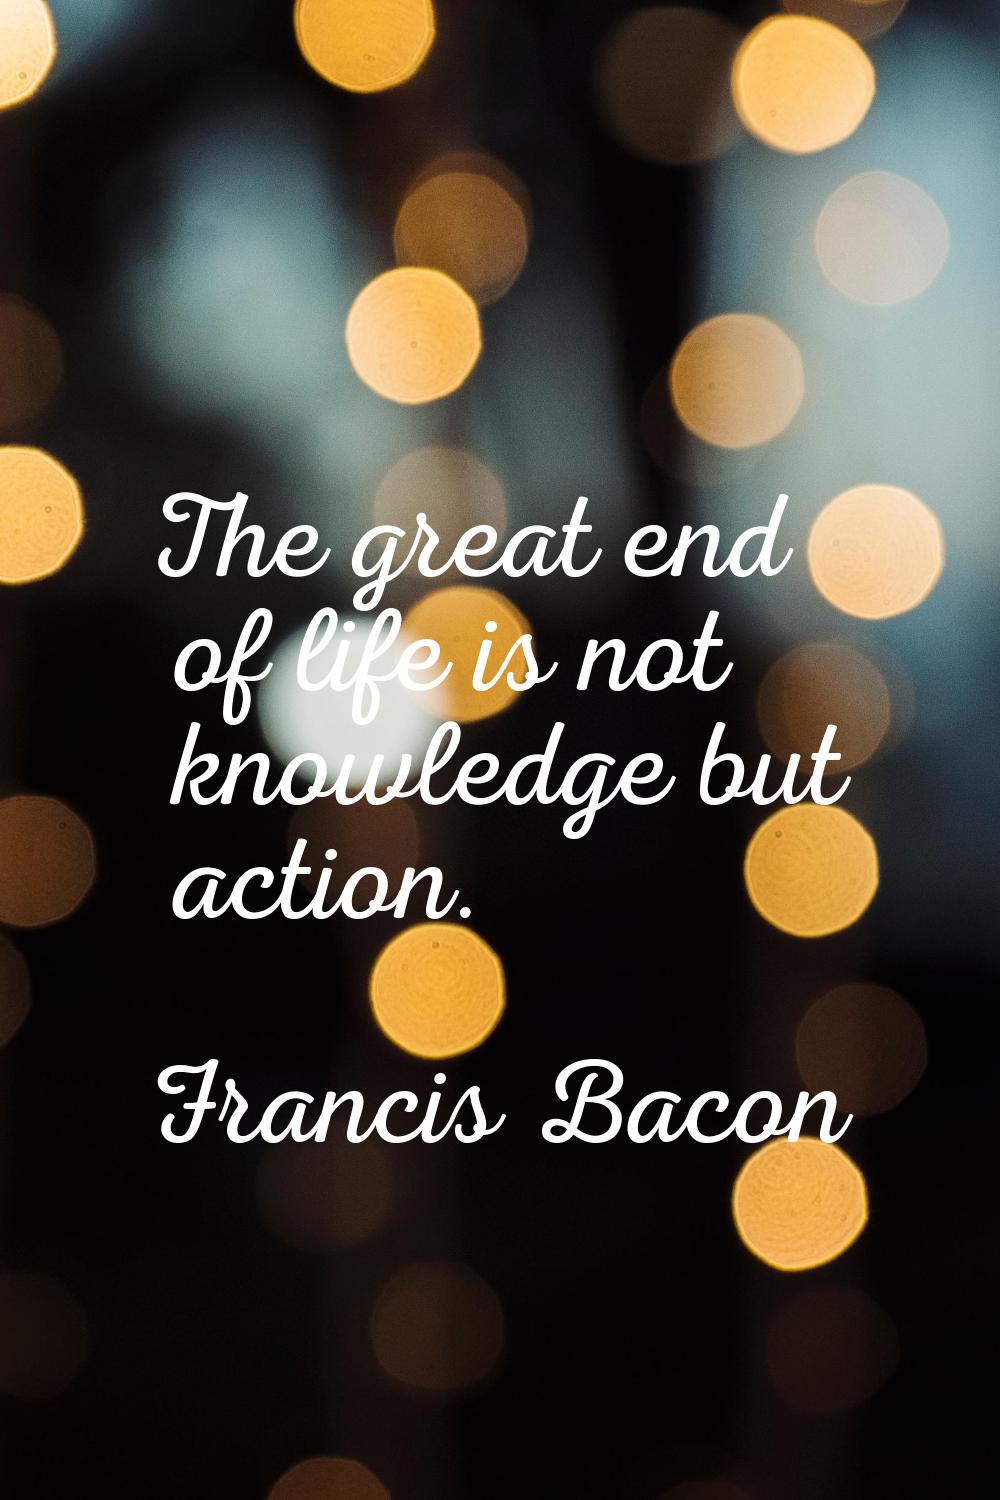 The great end of life is not knowledge but action.